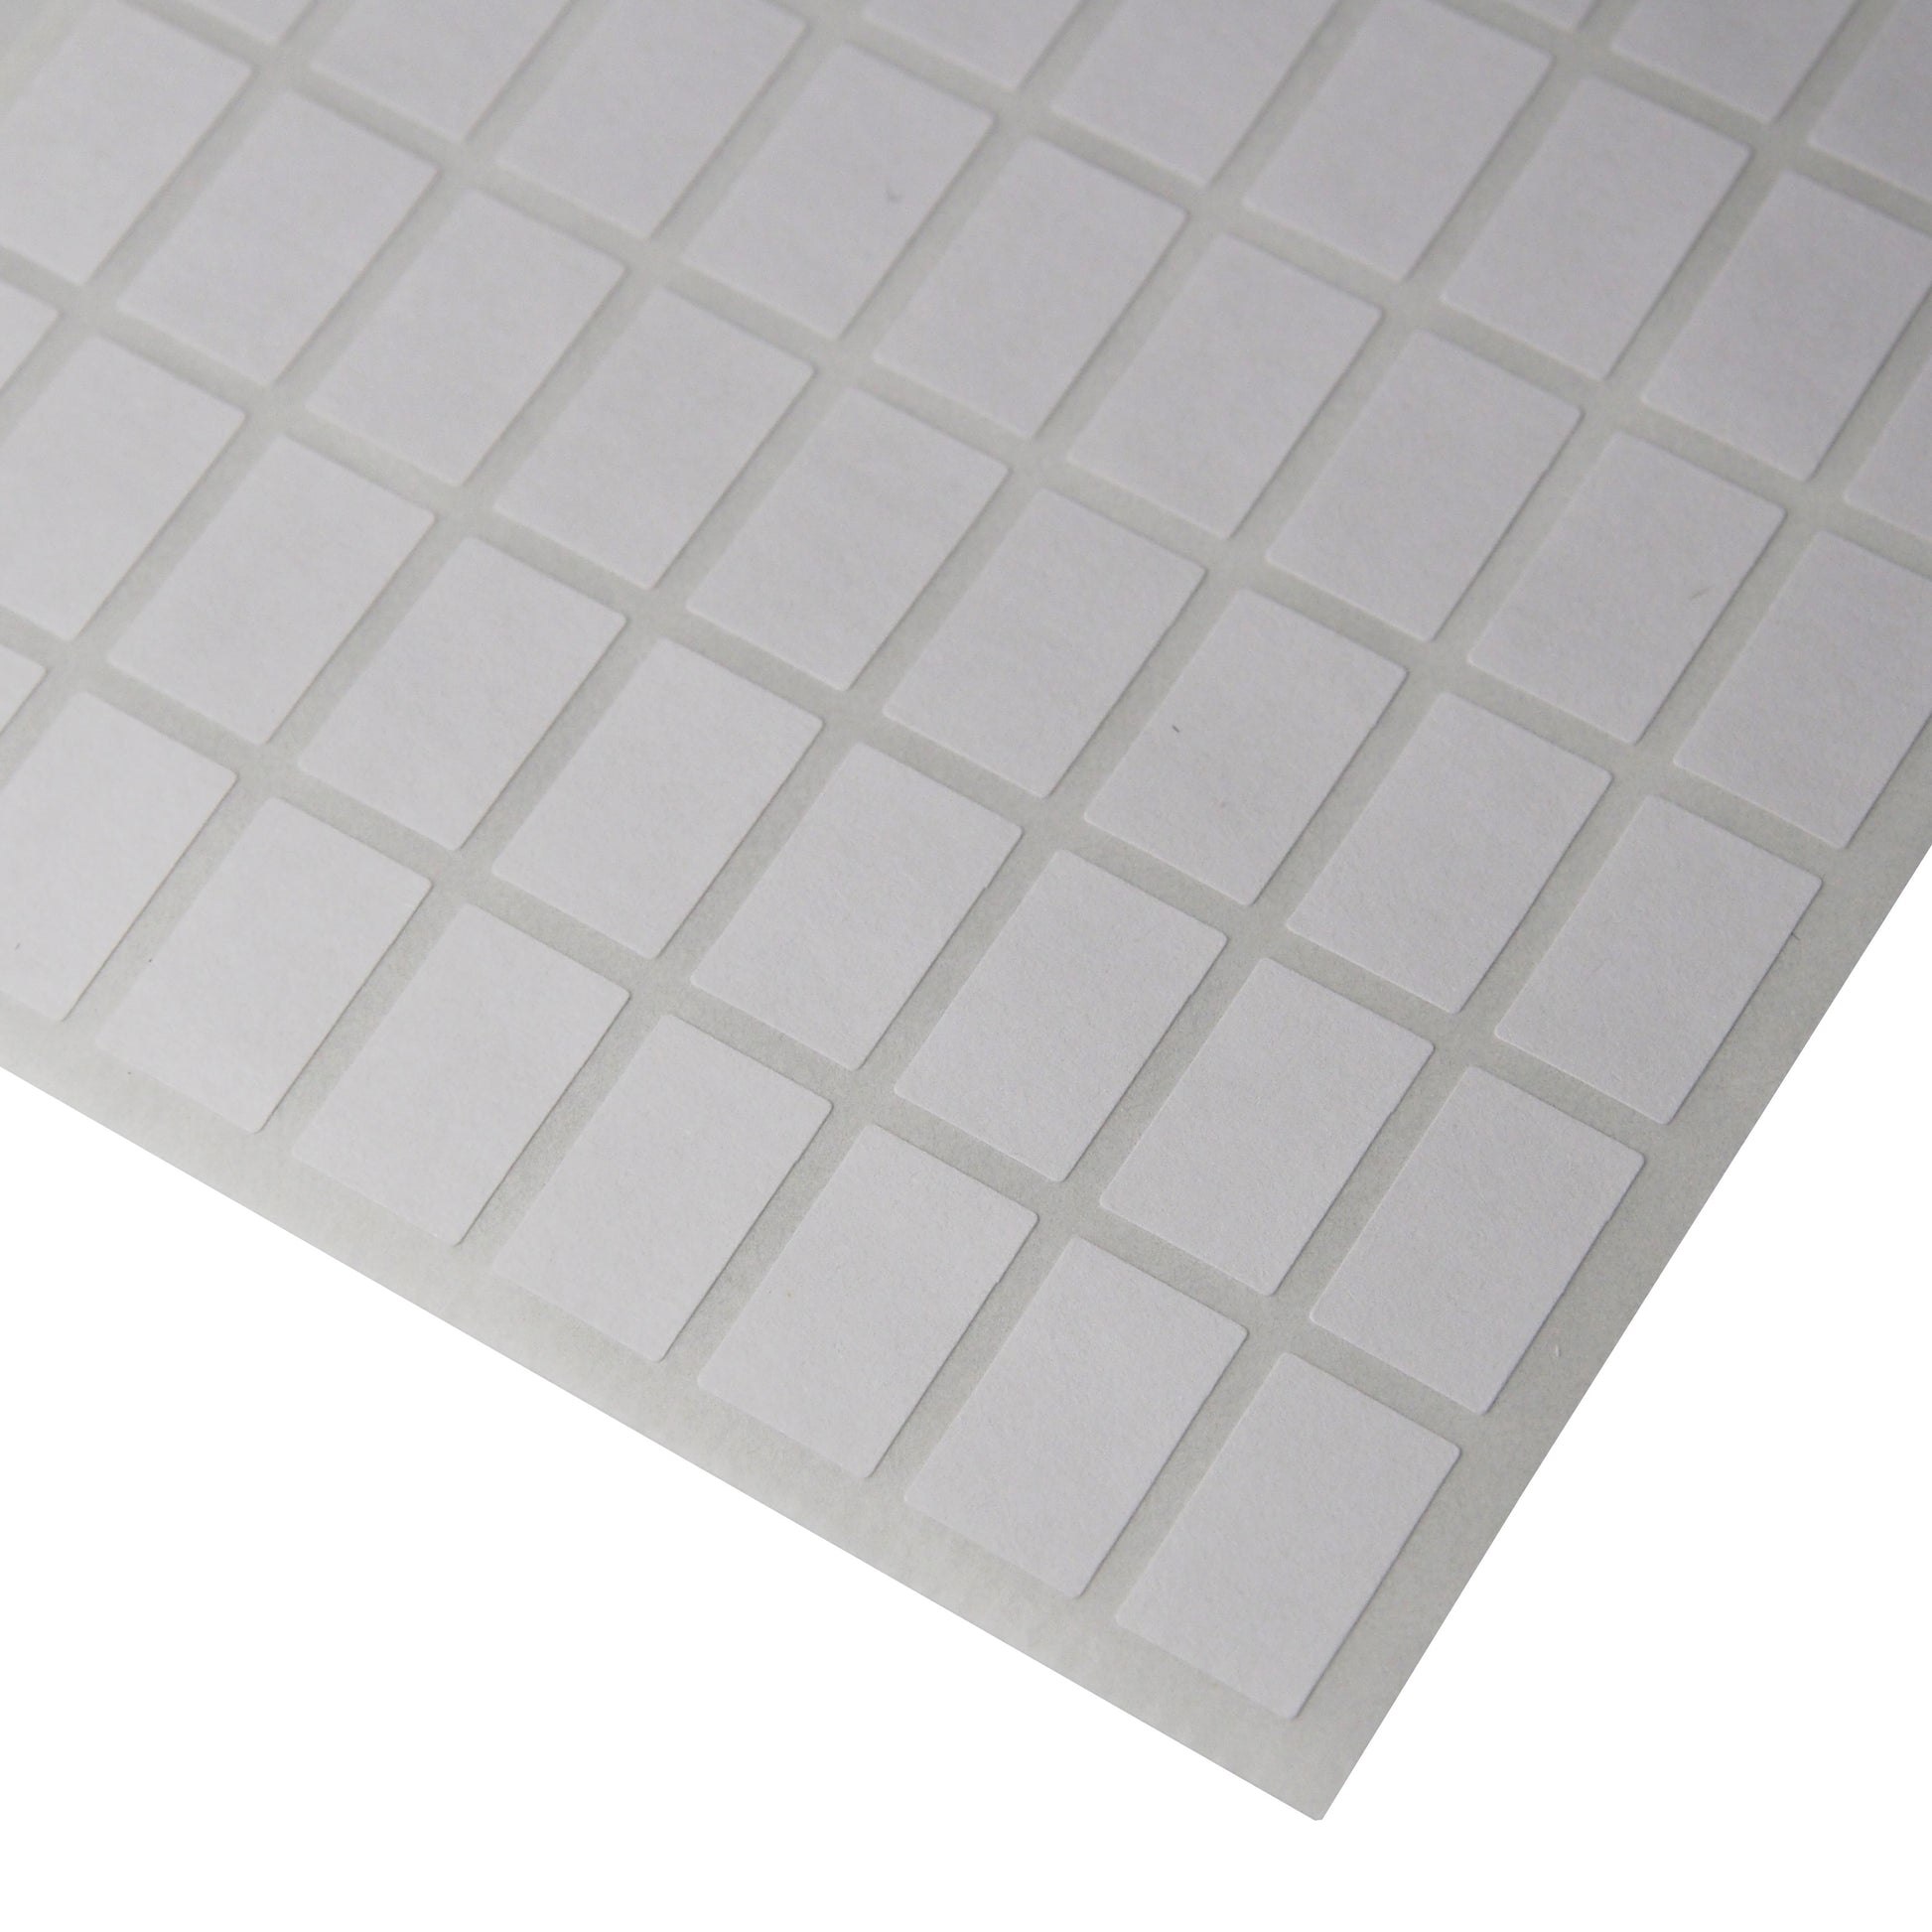 Corner of a sheet of Small Rectangular Self Adhesive Plain Labels - 1080 Labels/Pack (5/16" x 1/2")